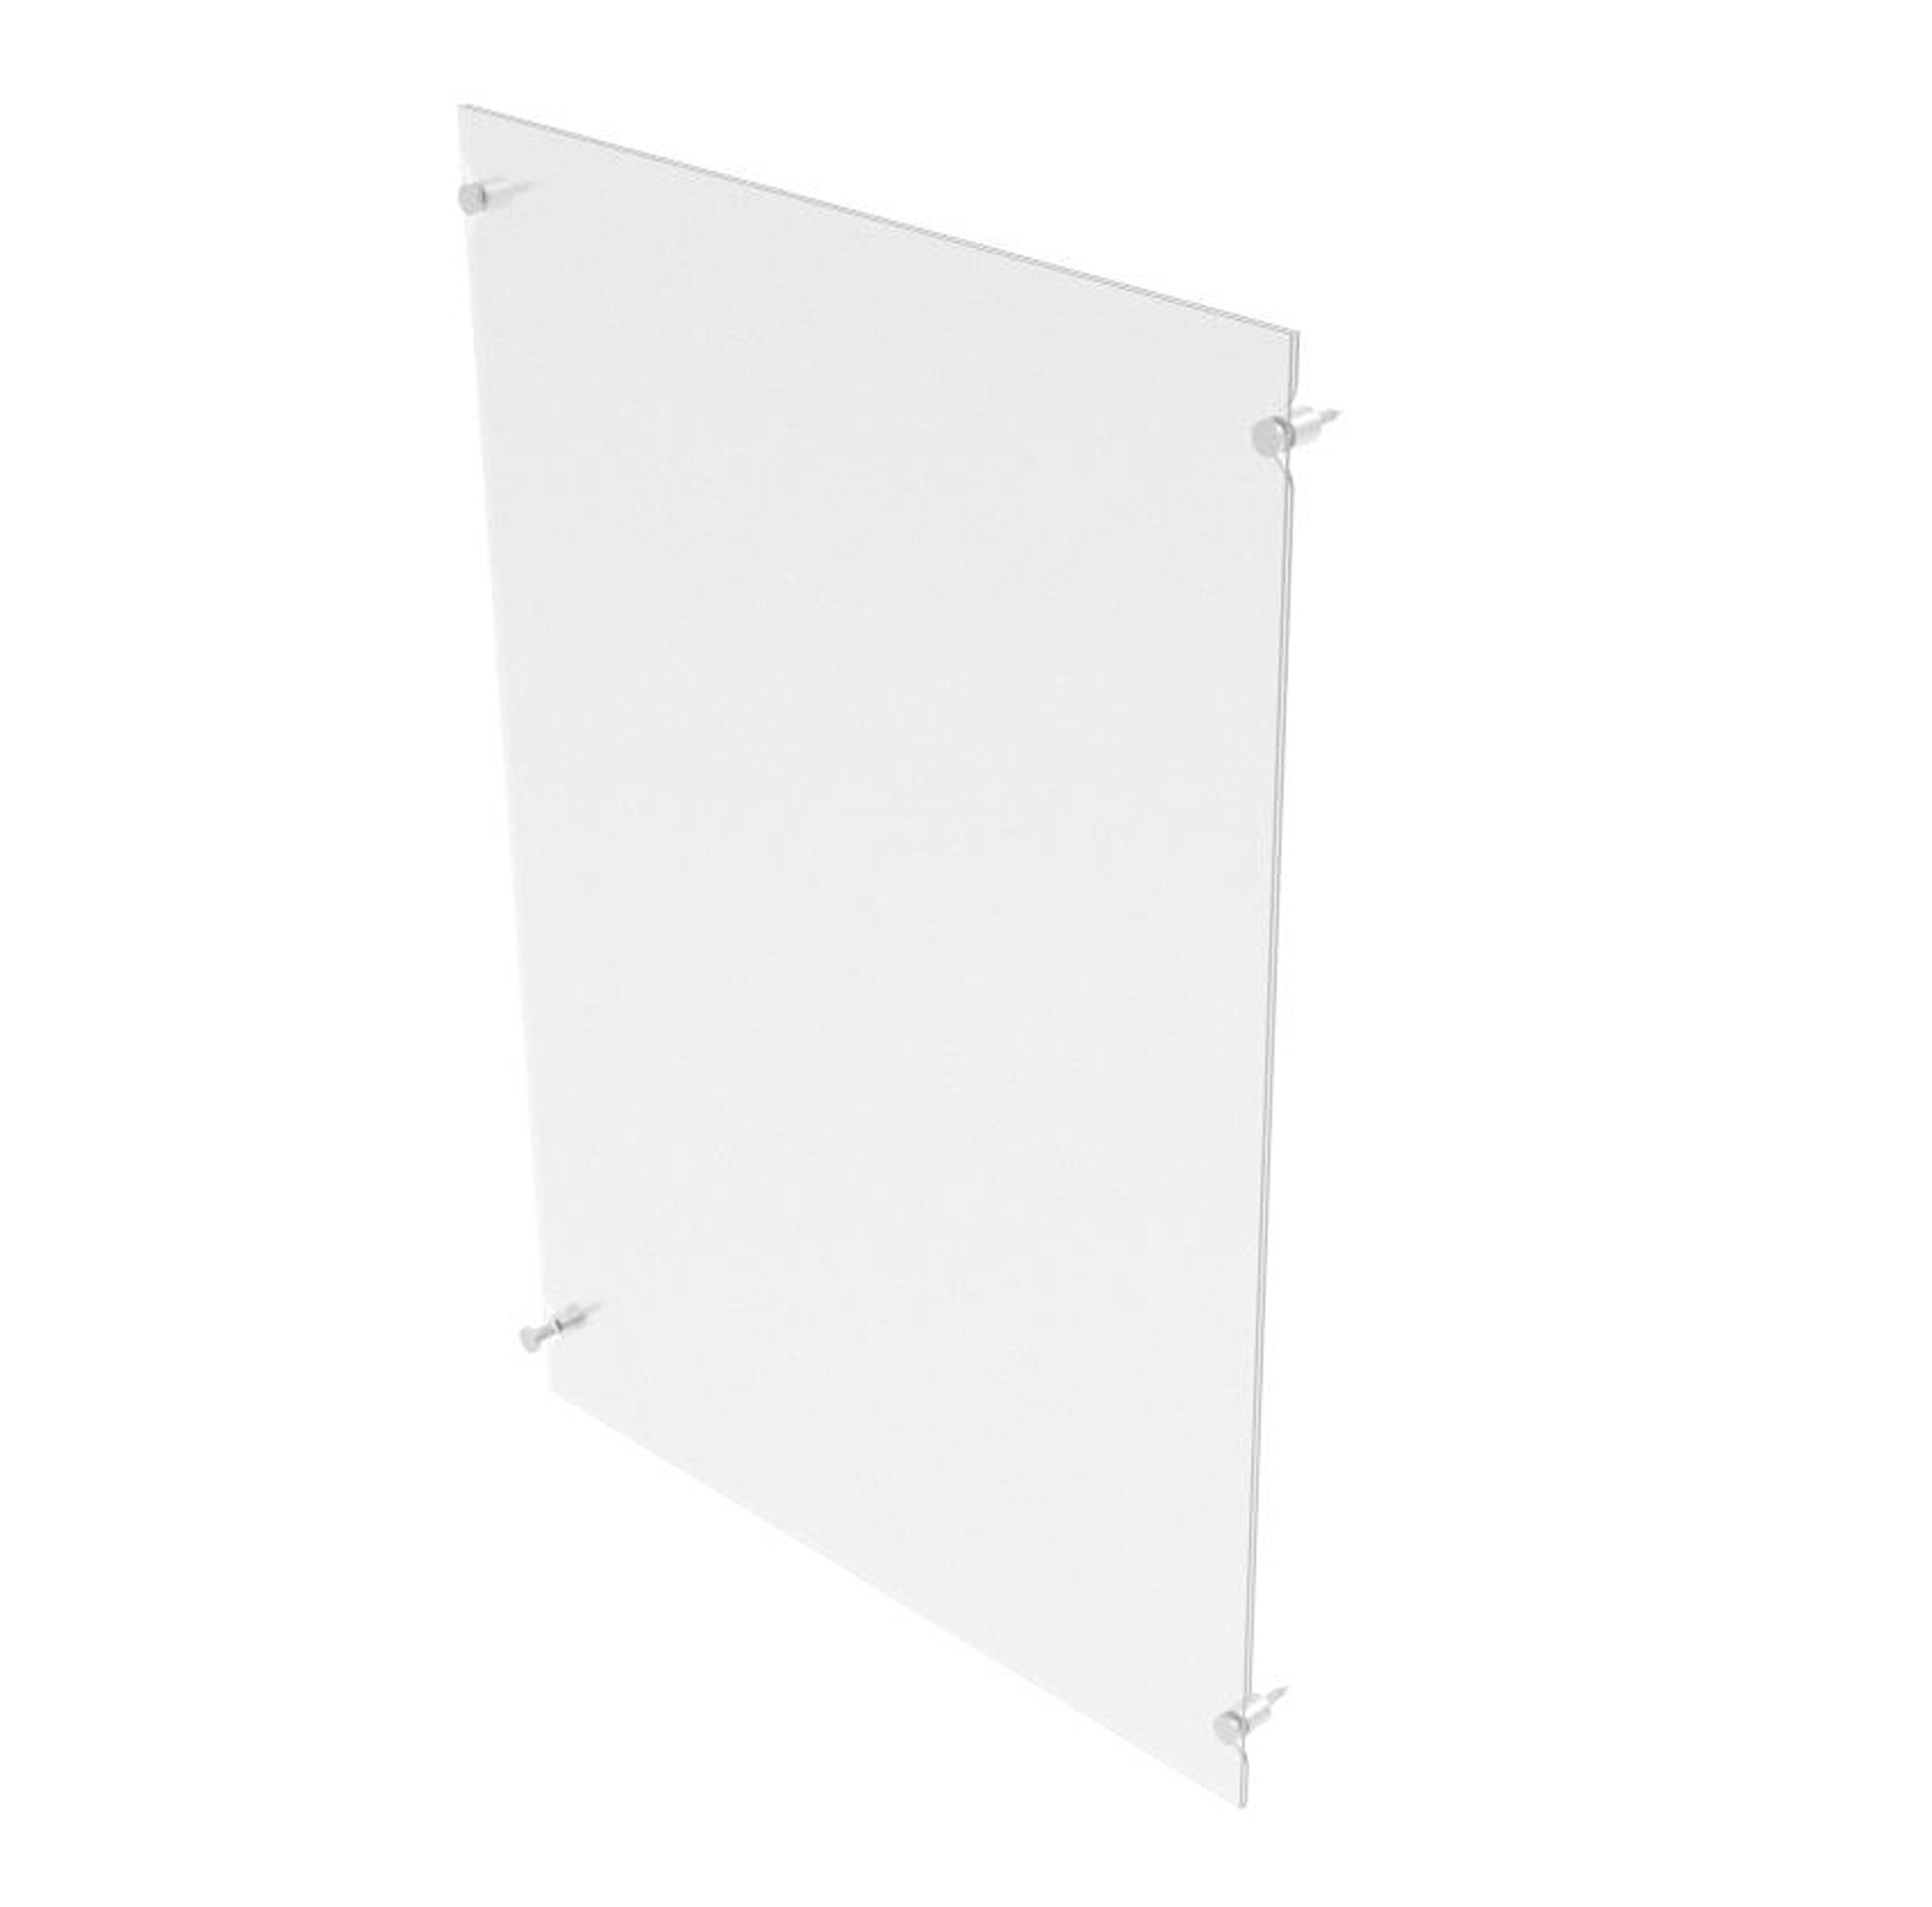 24 x 36 Wall Sign Holder Floating Graphic Poster Display